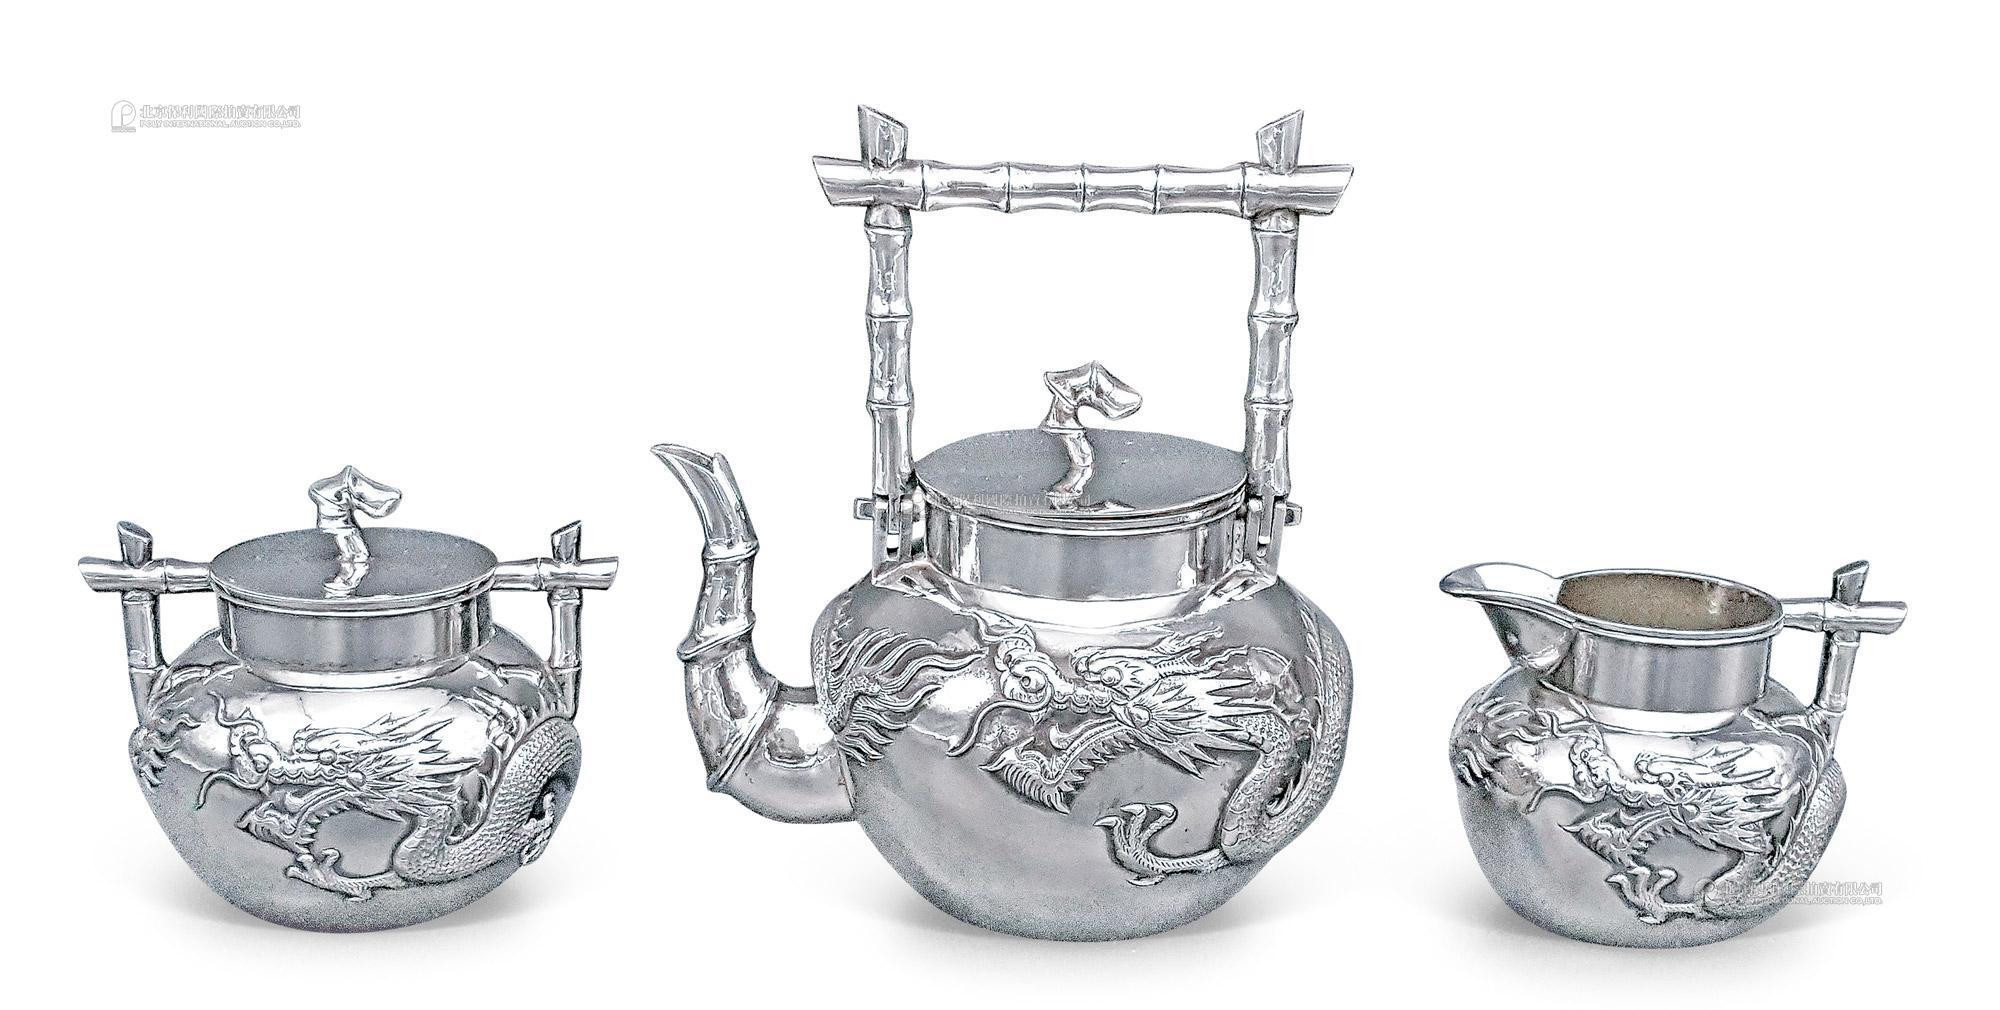 TUCK CHANG， A SET OF THREE-PIECE SILVER ‘RAMPANT DRAGON’ COFFEE AND TEA SERVICE WITH STYLISED BAMBOO HANDLE